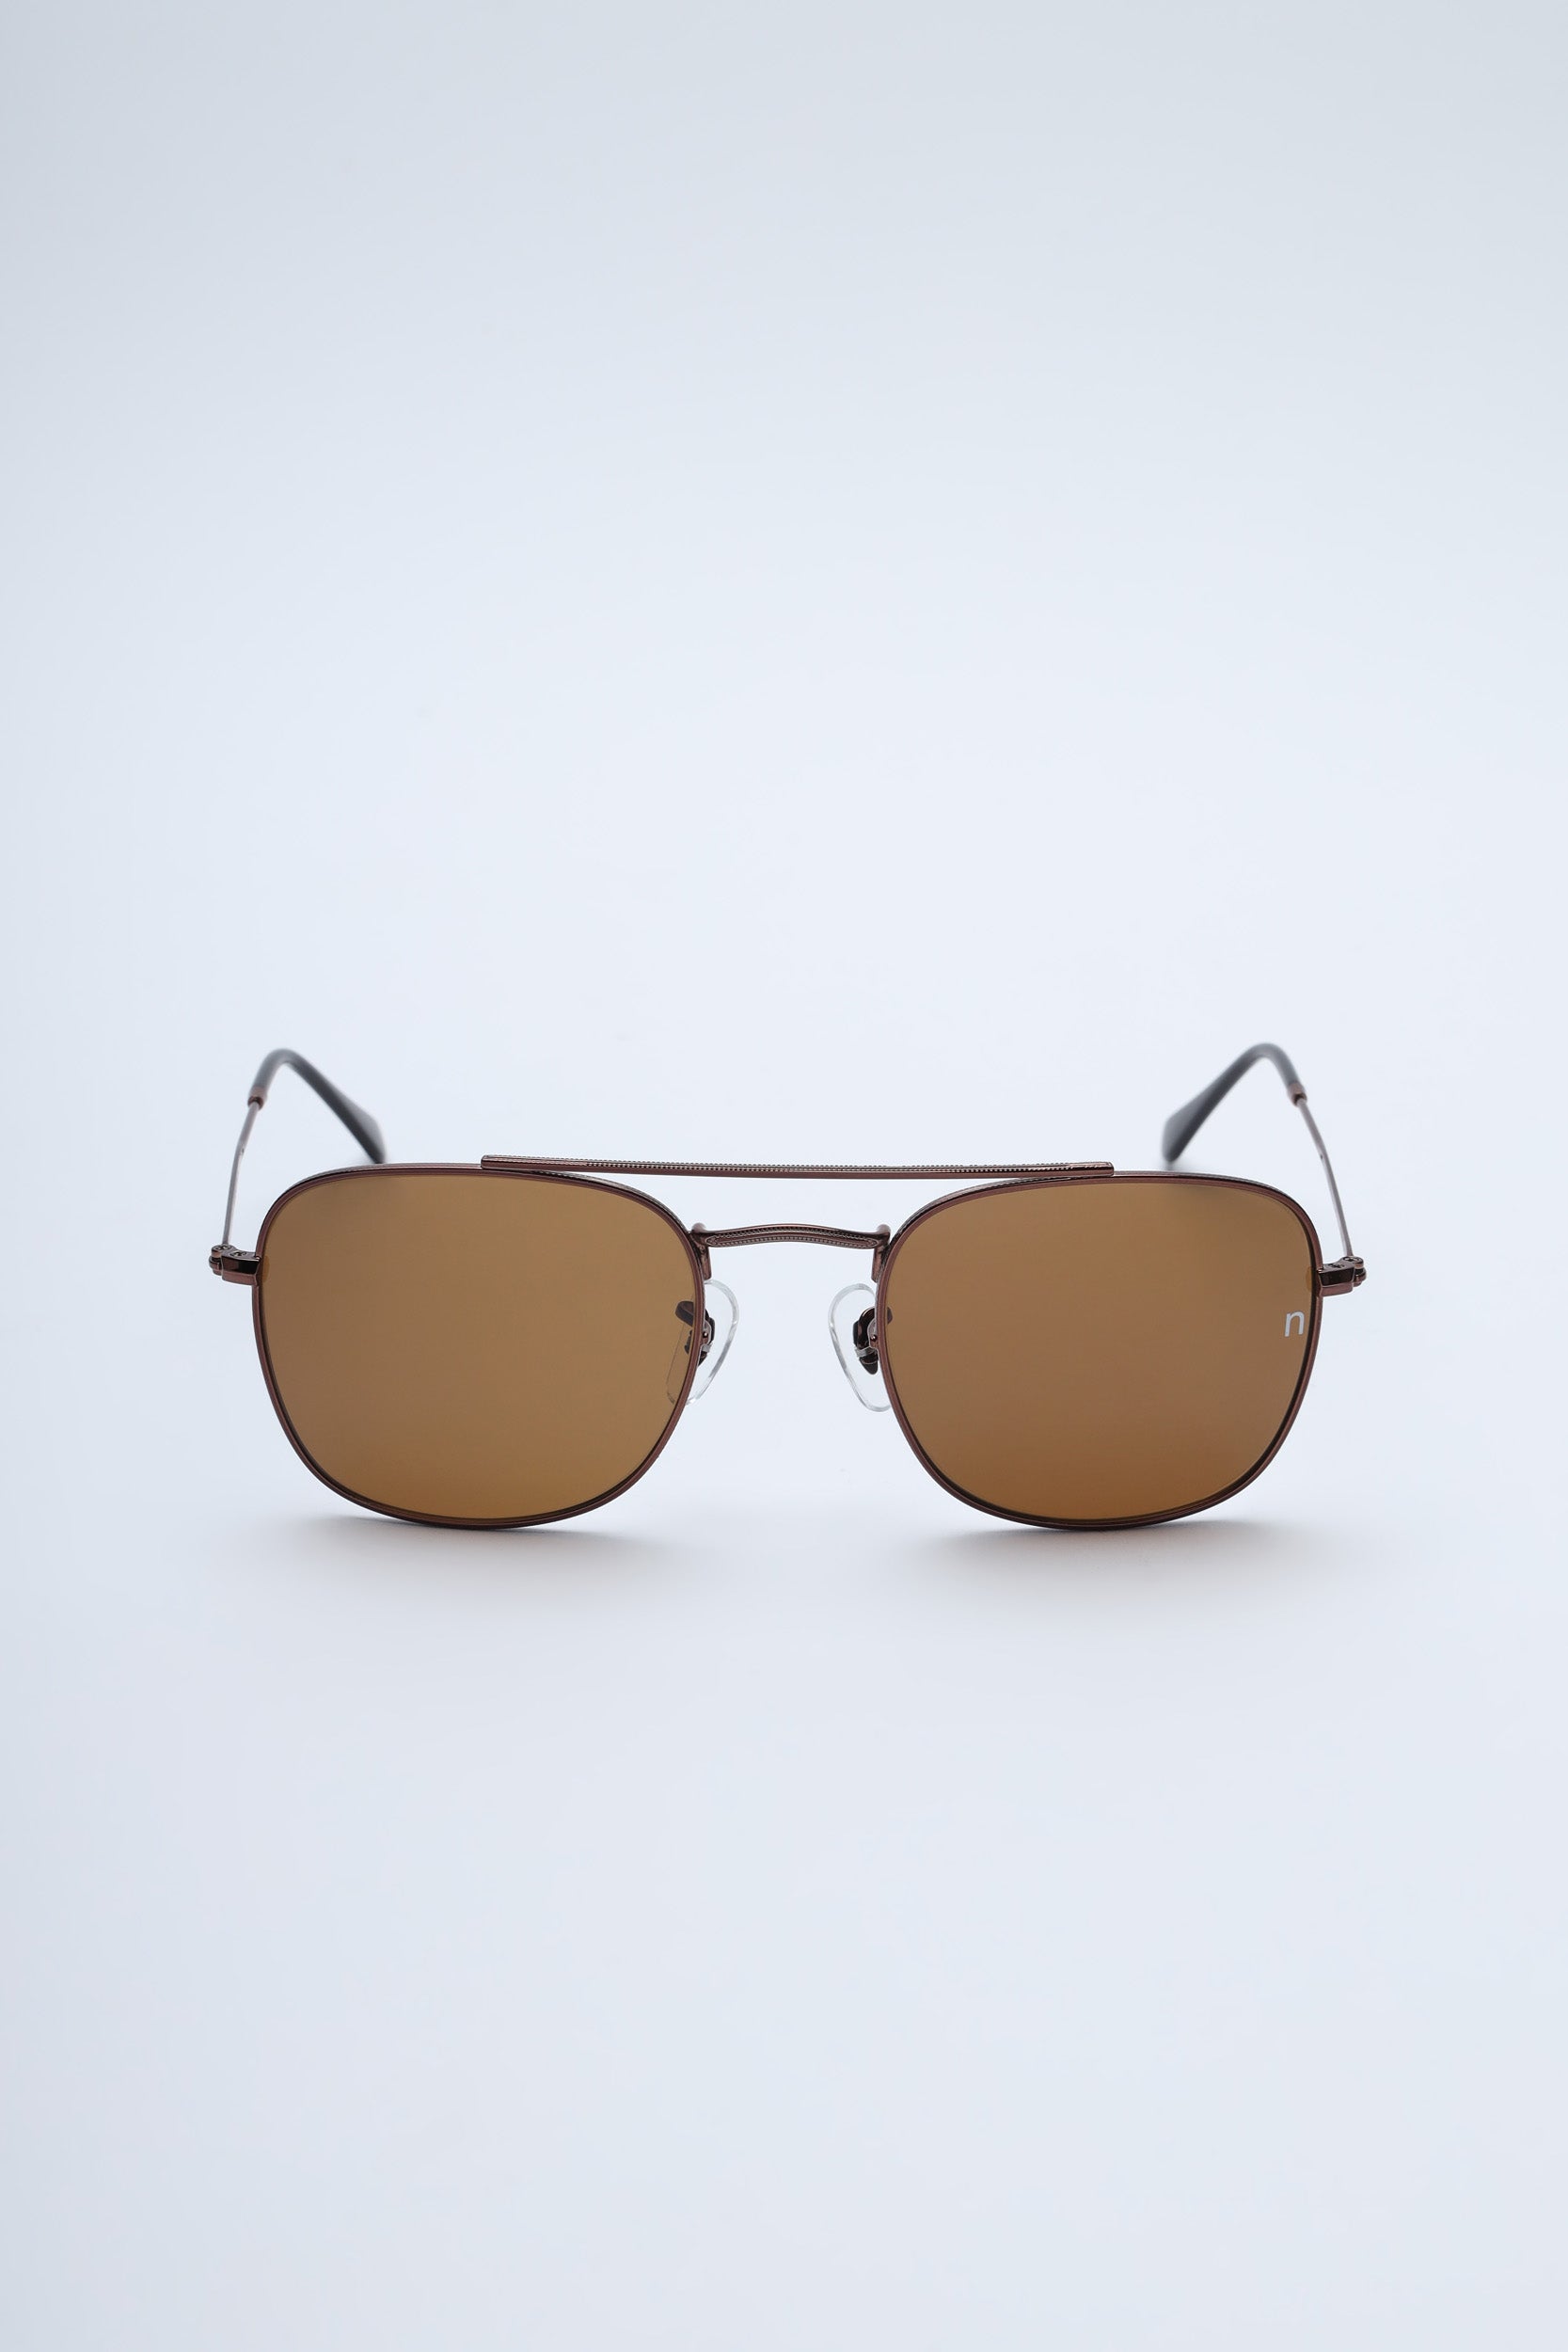 NS2008BRFBRL Stainless Steel Brown Frame with Brown Glass Lens Sunglas